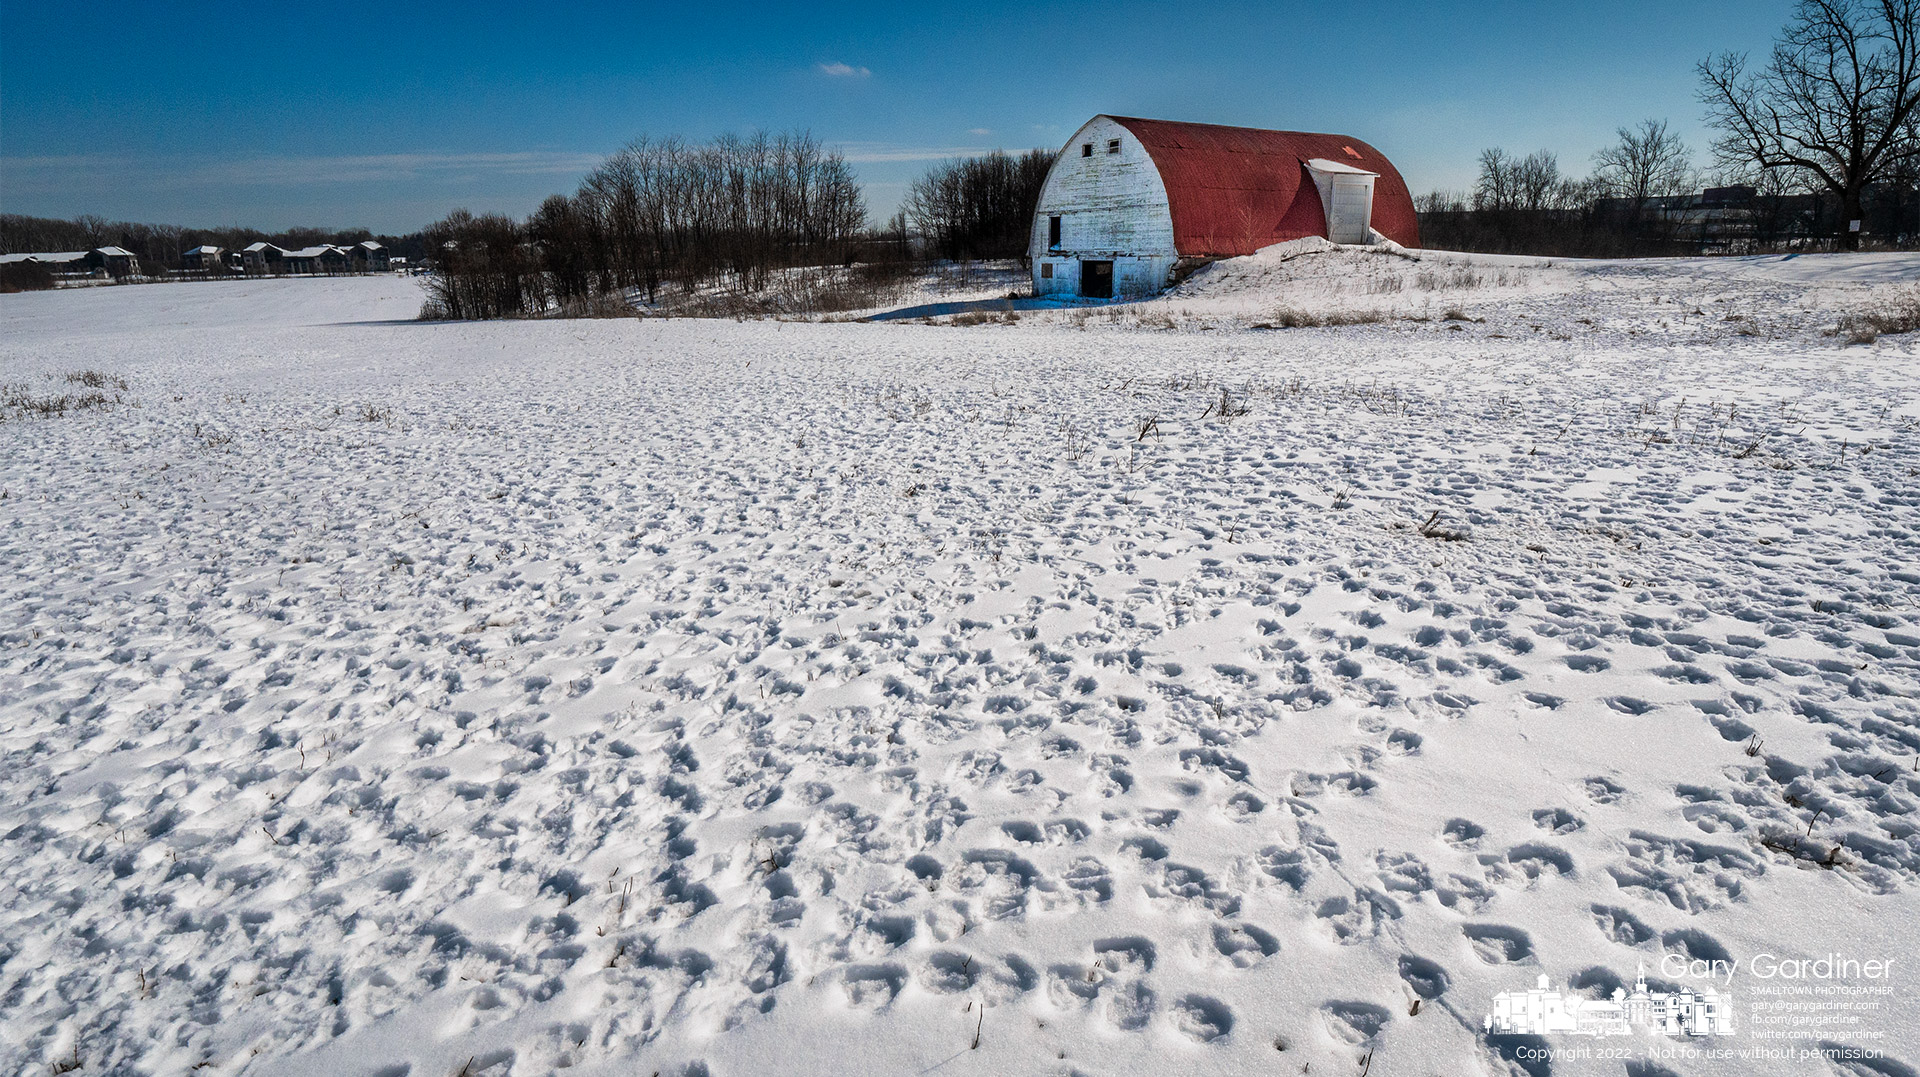 A large collection of deer tracks in the snow mark a section of the Braun Farm fields where their winter activity appears to be the most active. My Final Photo for Feb. 7, 2022.